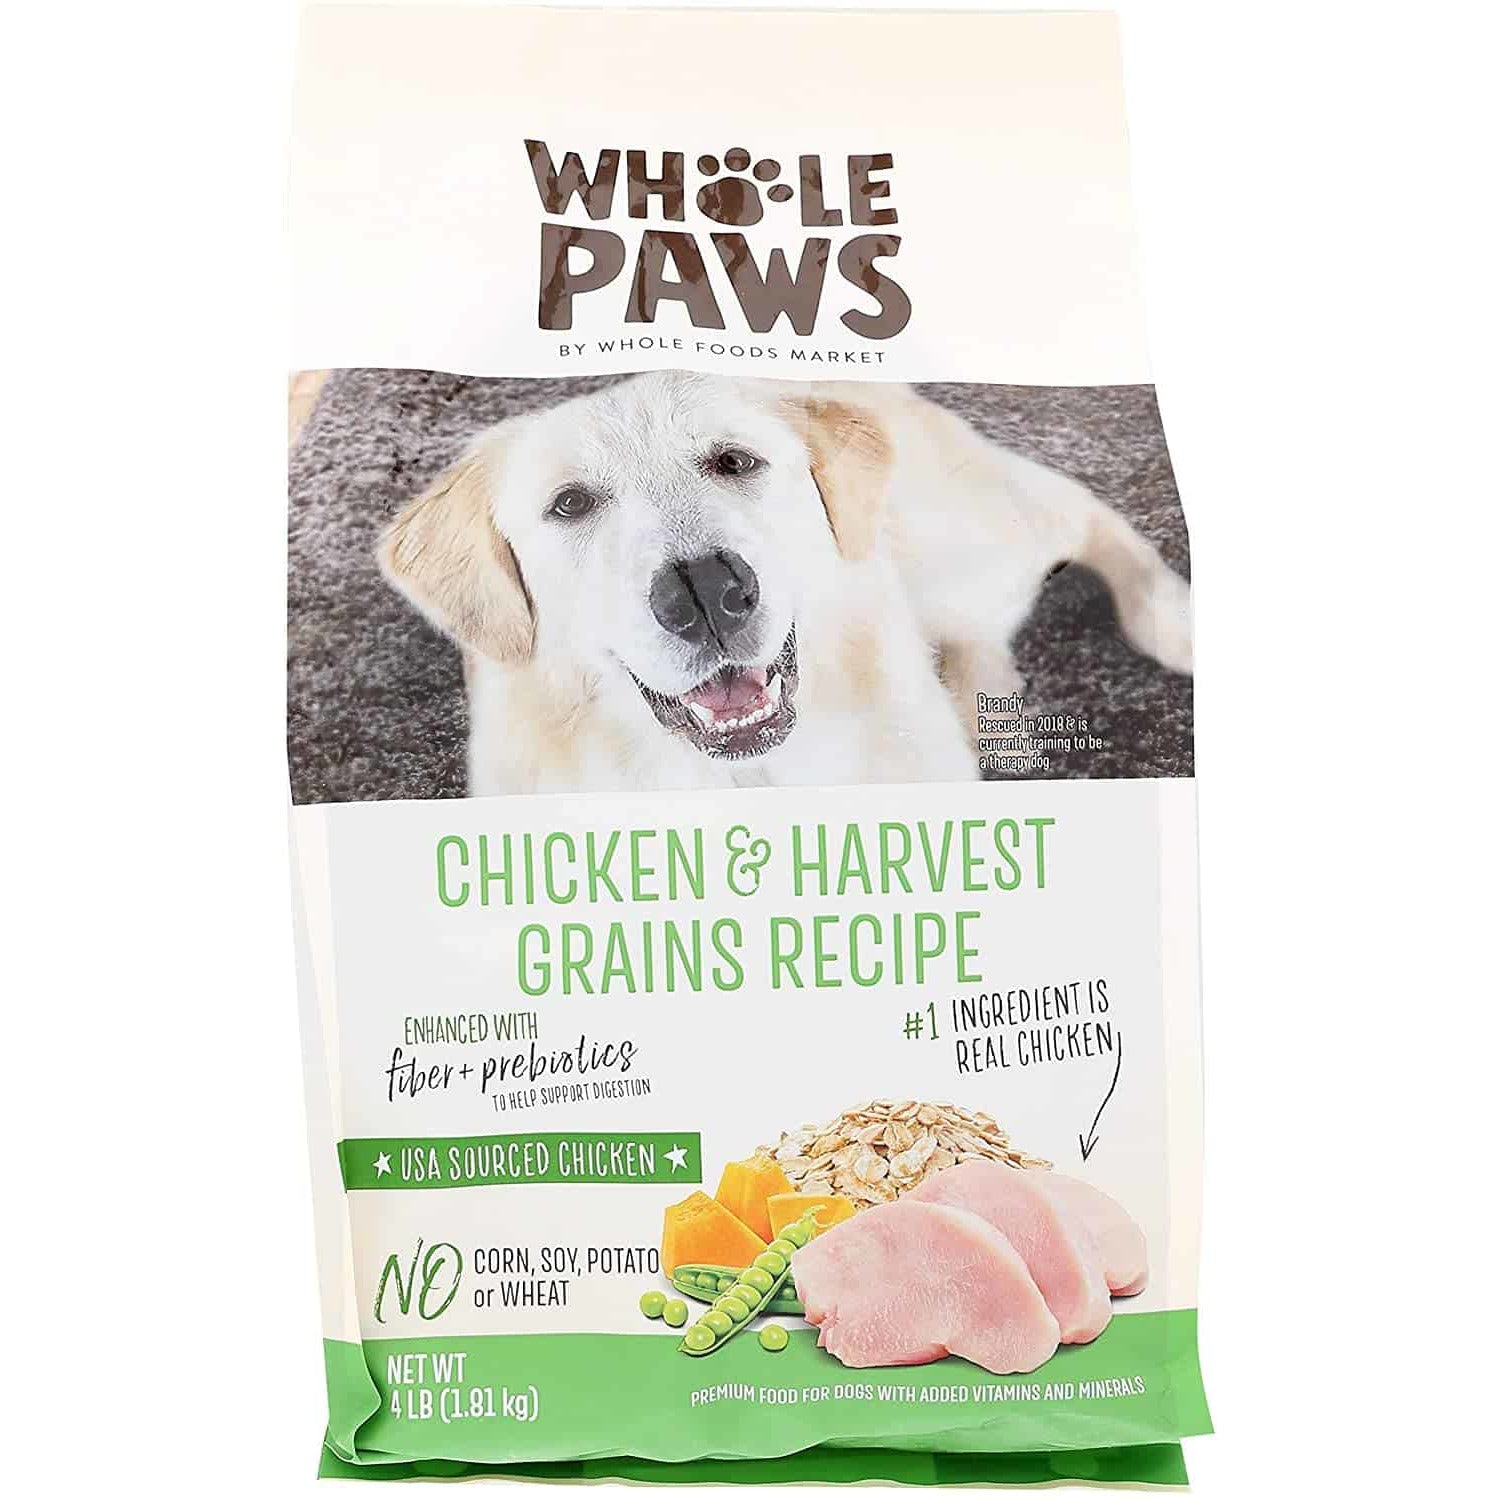 Whole Paws Dog Food, Chicken &amp; Harvest Grains Recipe, 4 Lb.